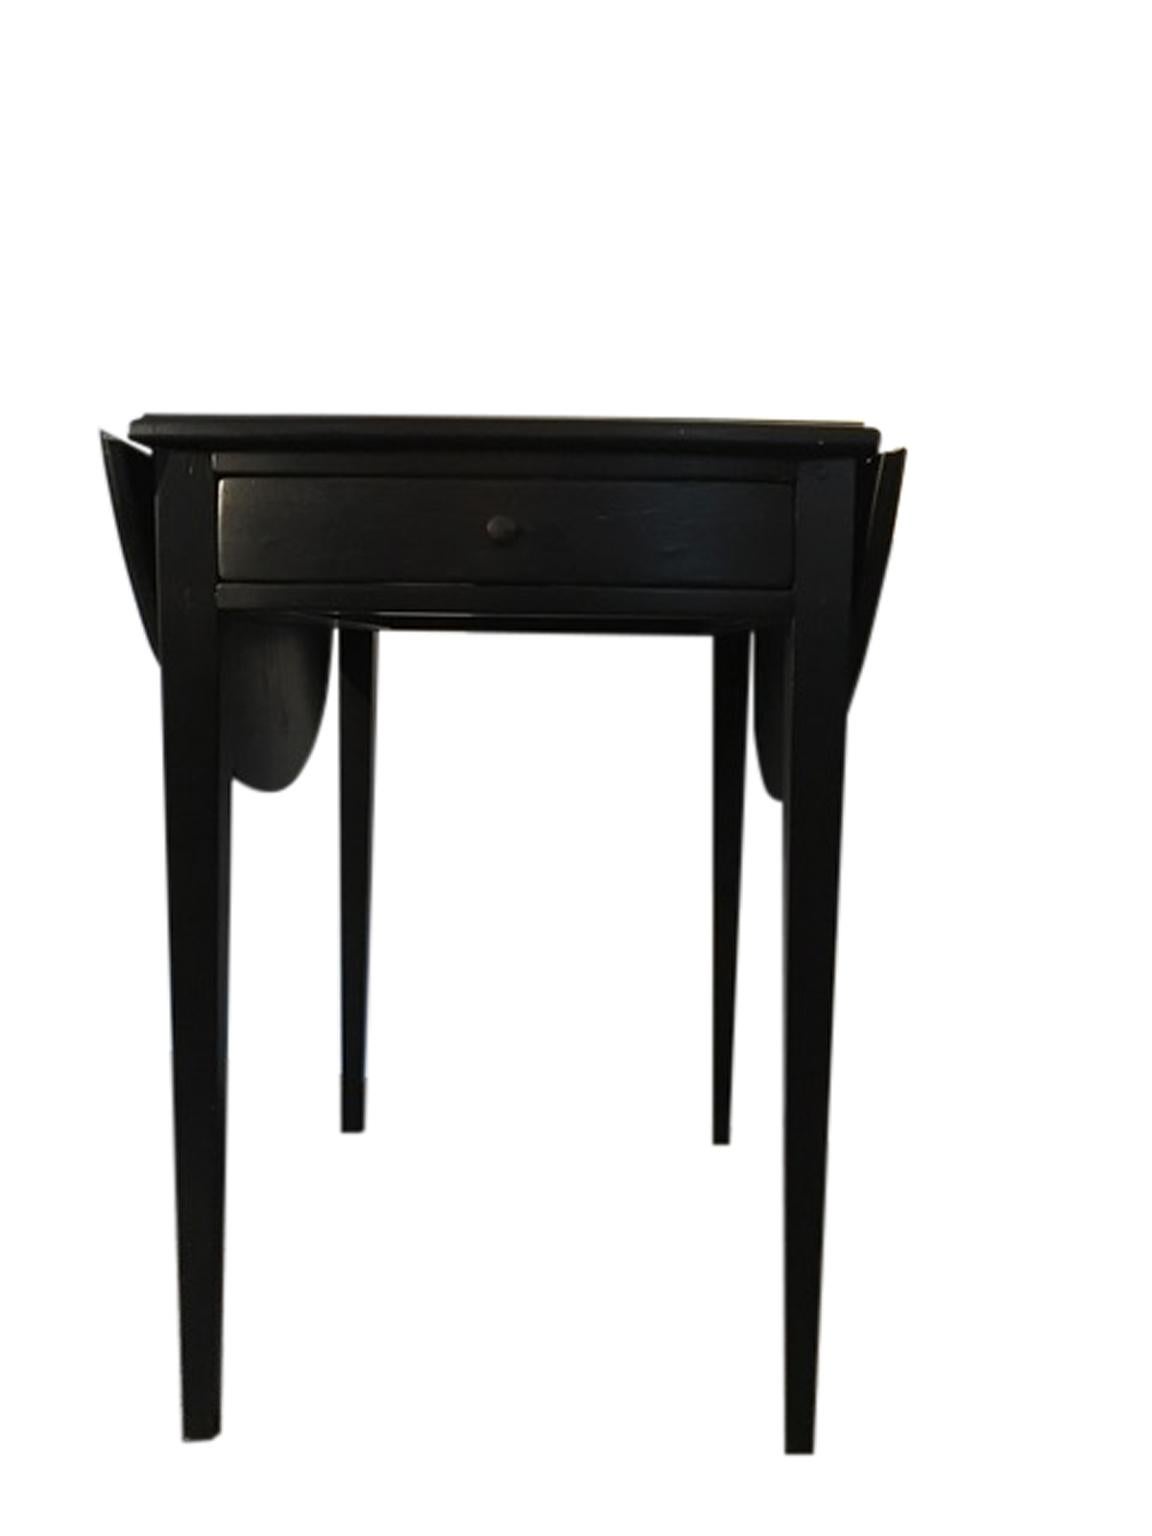 Italy Walnut Drop-Leaf Table Black Lacquered Contemporary Production In Stock 8